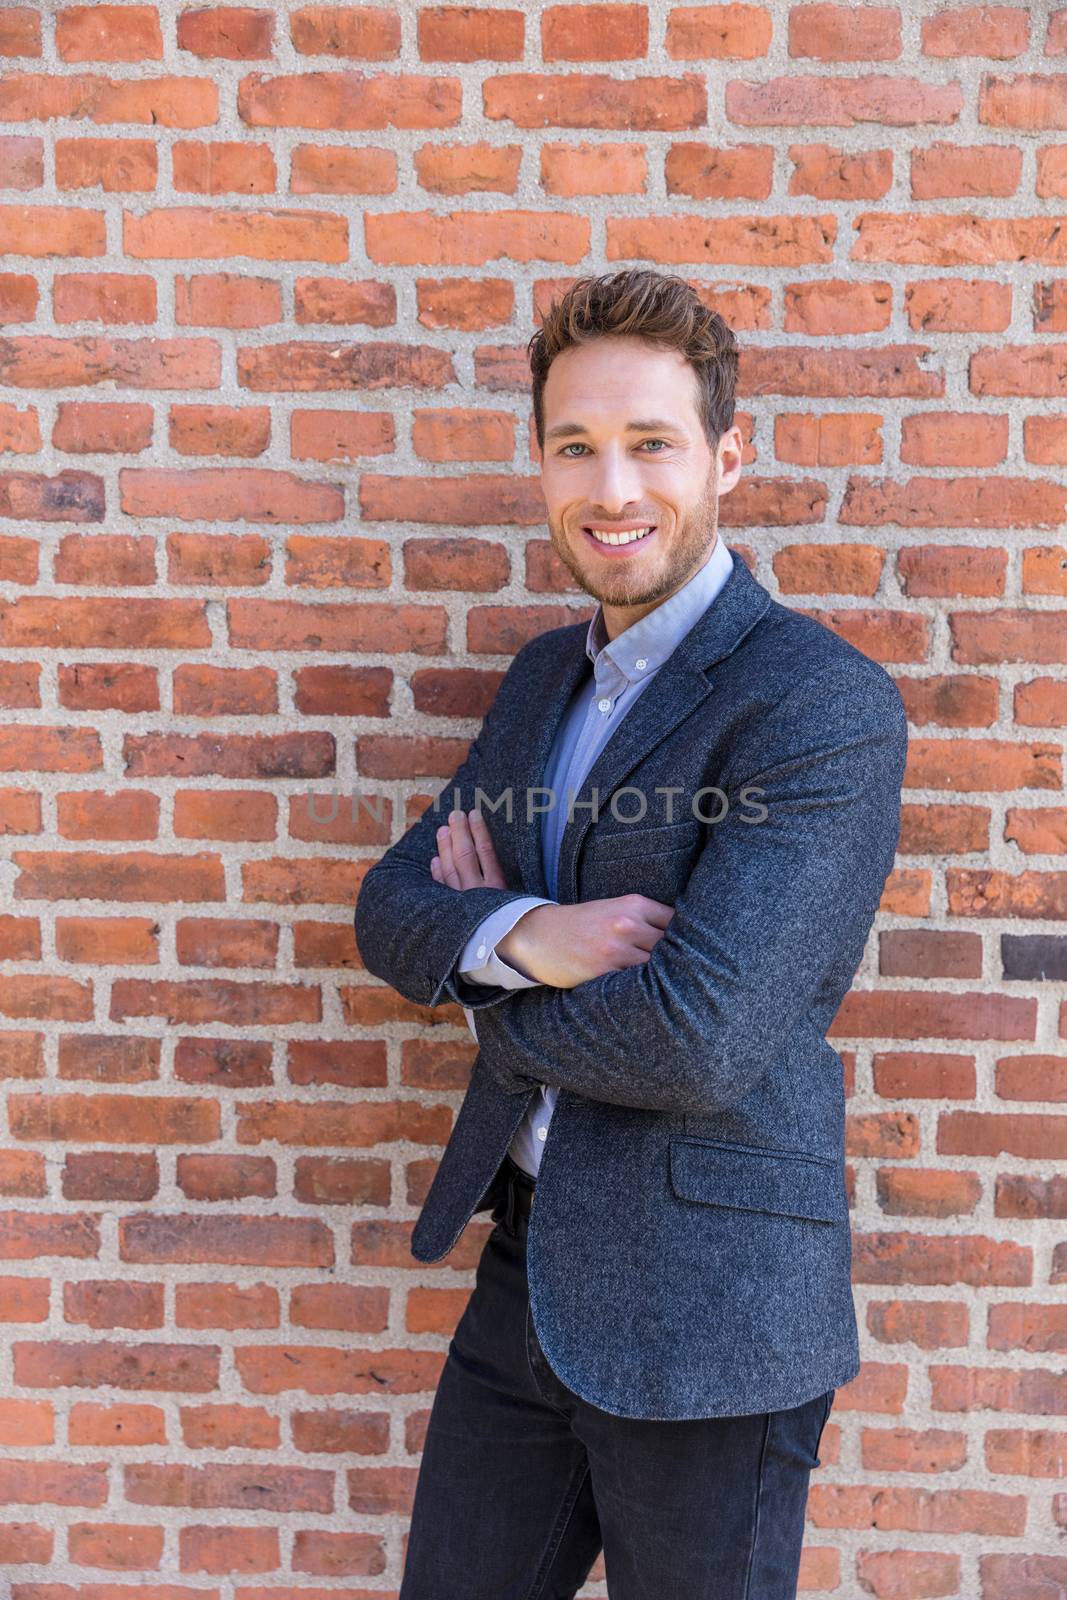 Businessman portrait on brick wall background. Young confident smiling man standing arms crossed, looking at camera.